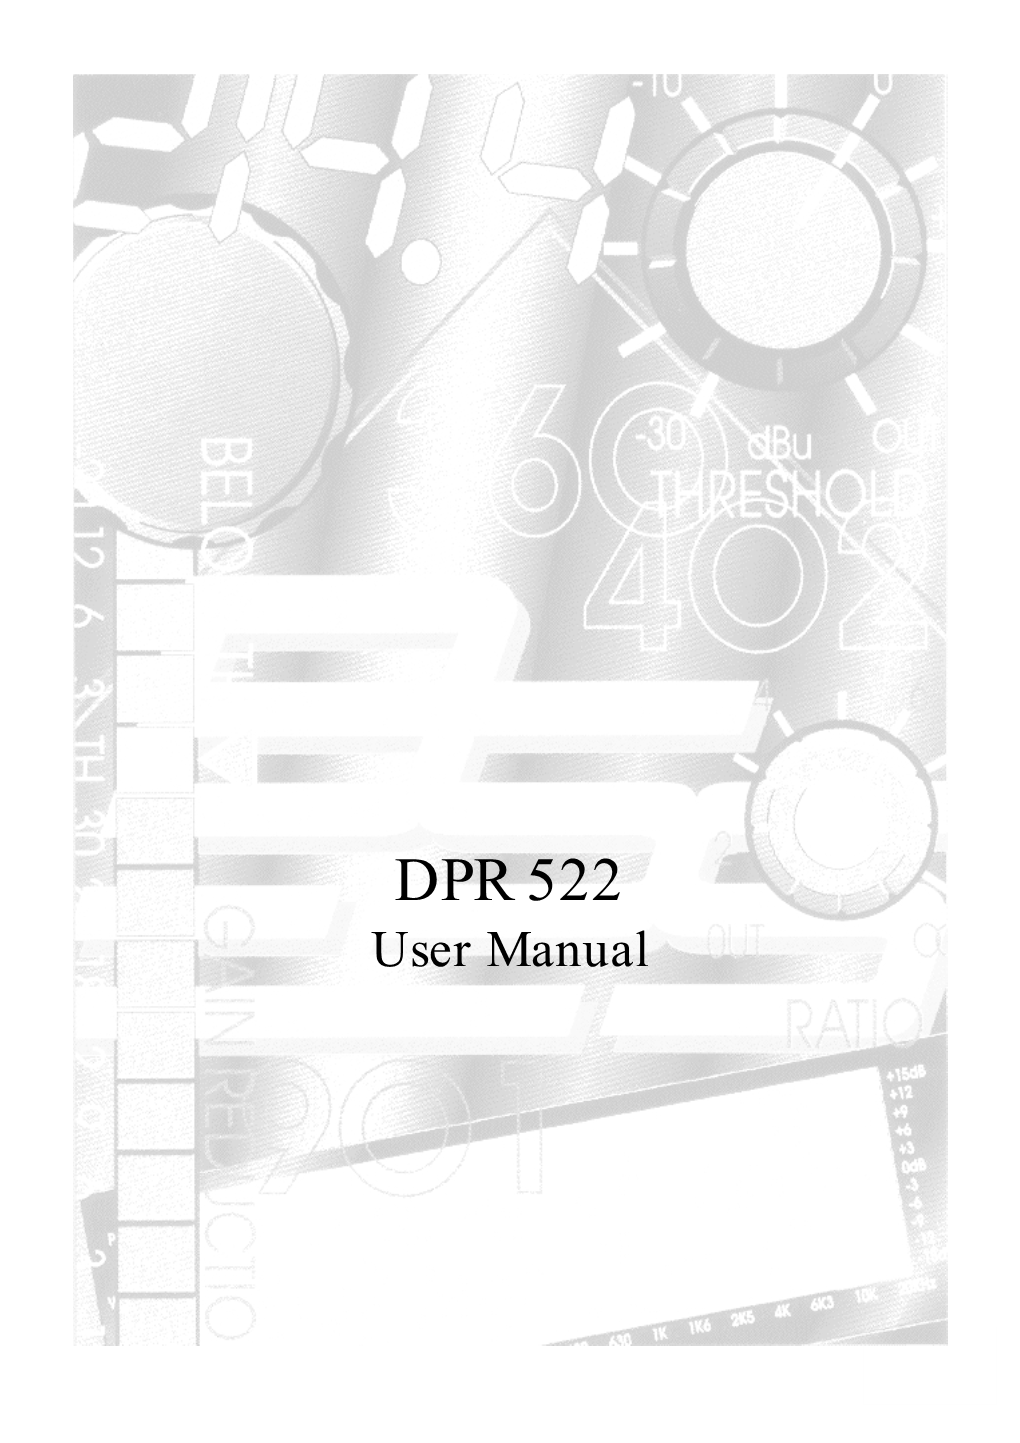 OPAL Series DPR-522 Owner's Manual-English